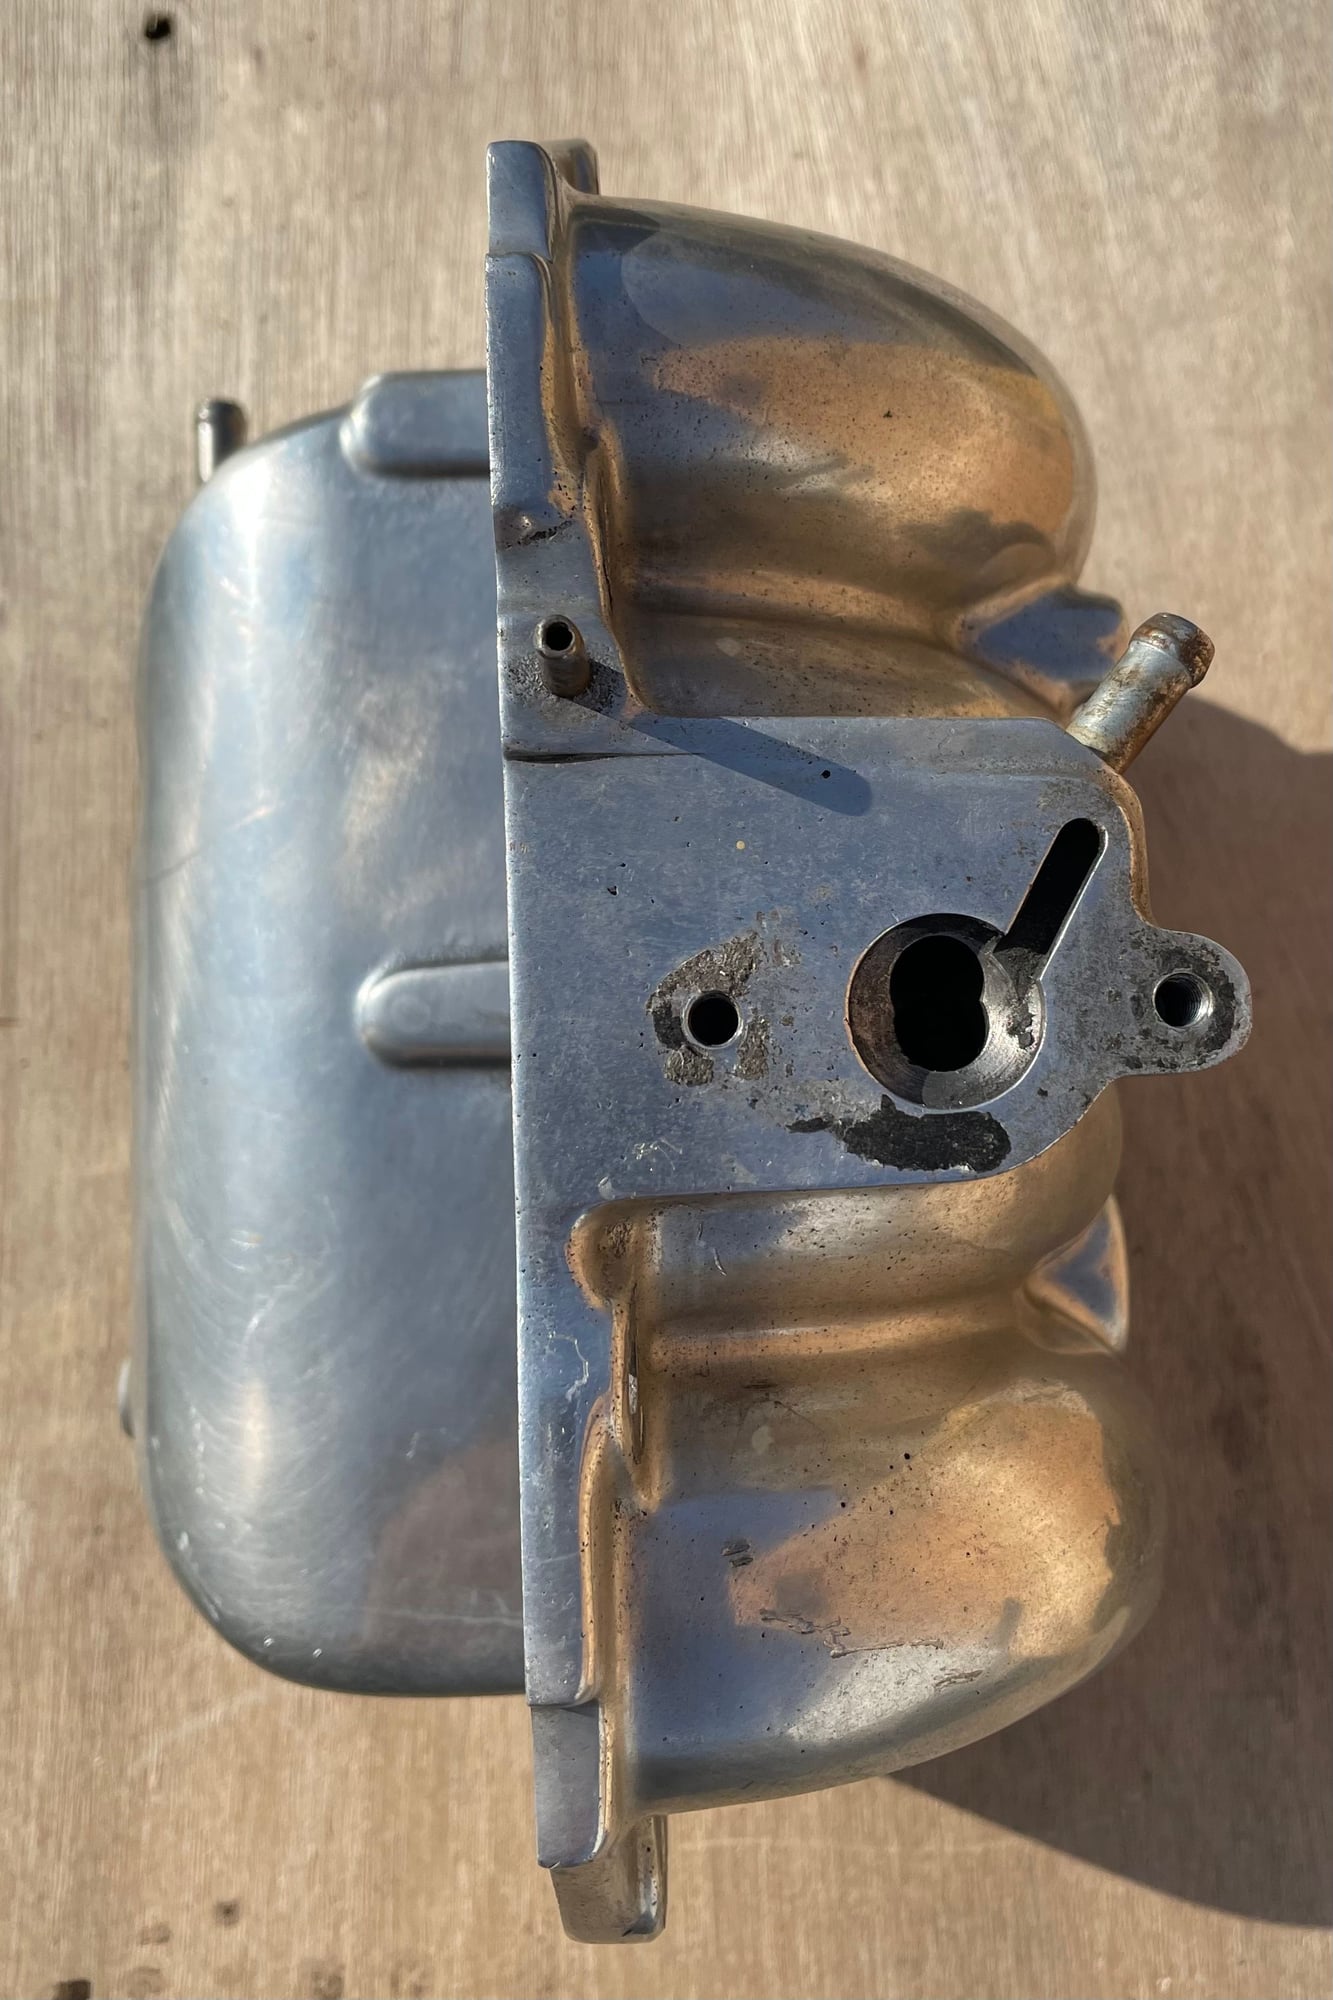 Engine - Intake/Fuel - S4 Turbo II UIM Polished Upper Intake Manifold with 4 Extra Fuel Injector Bungs - Used - Chicago, IL 60641, United States